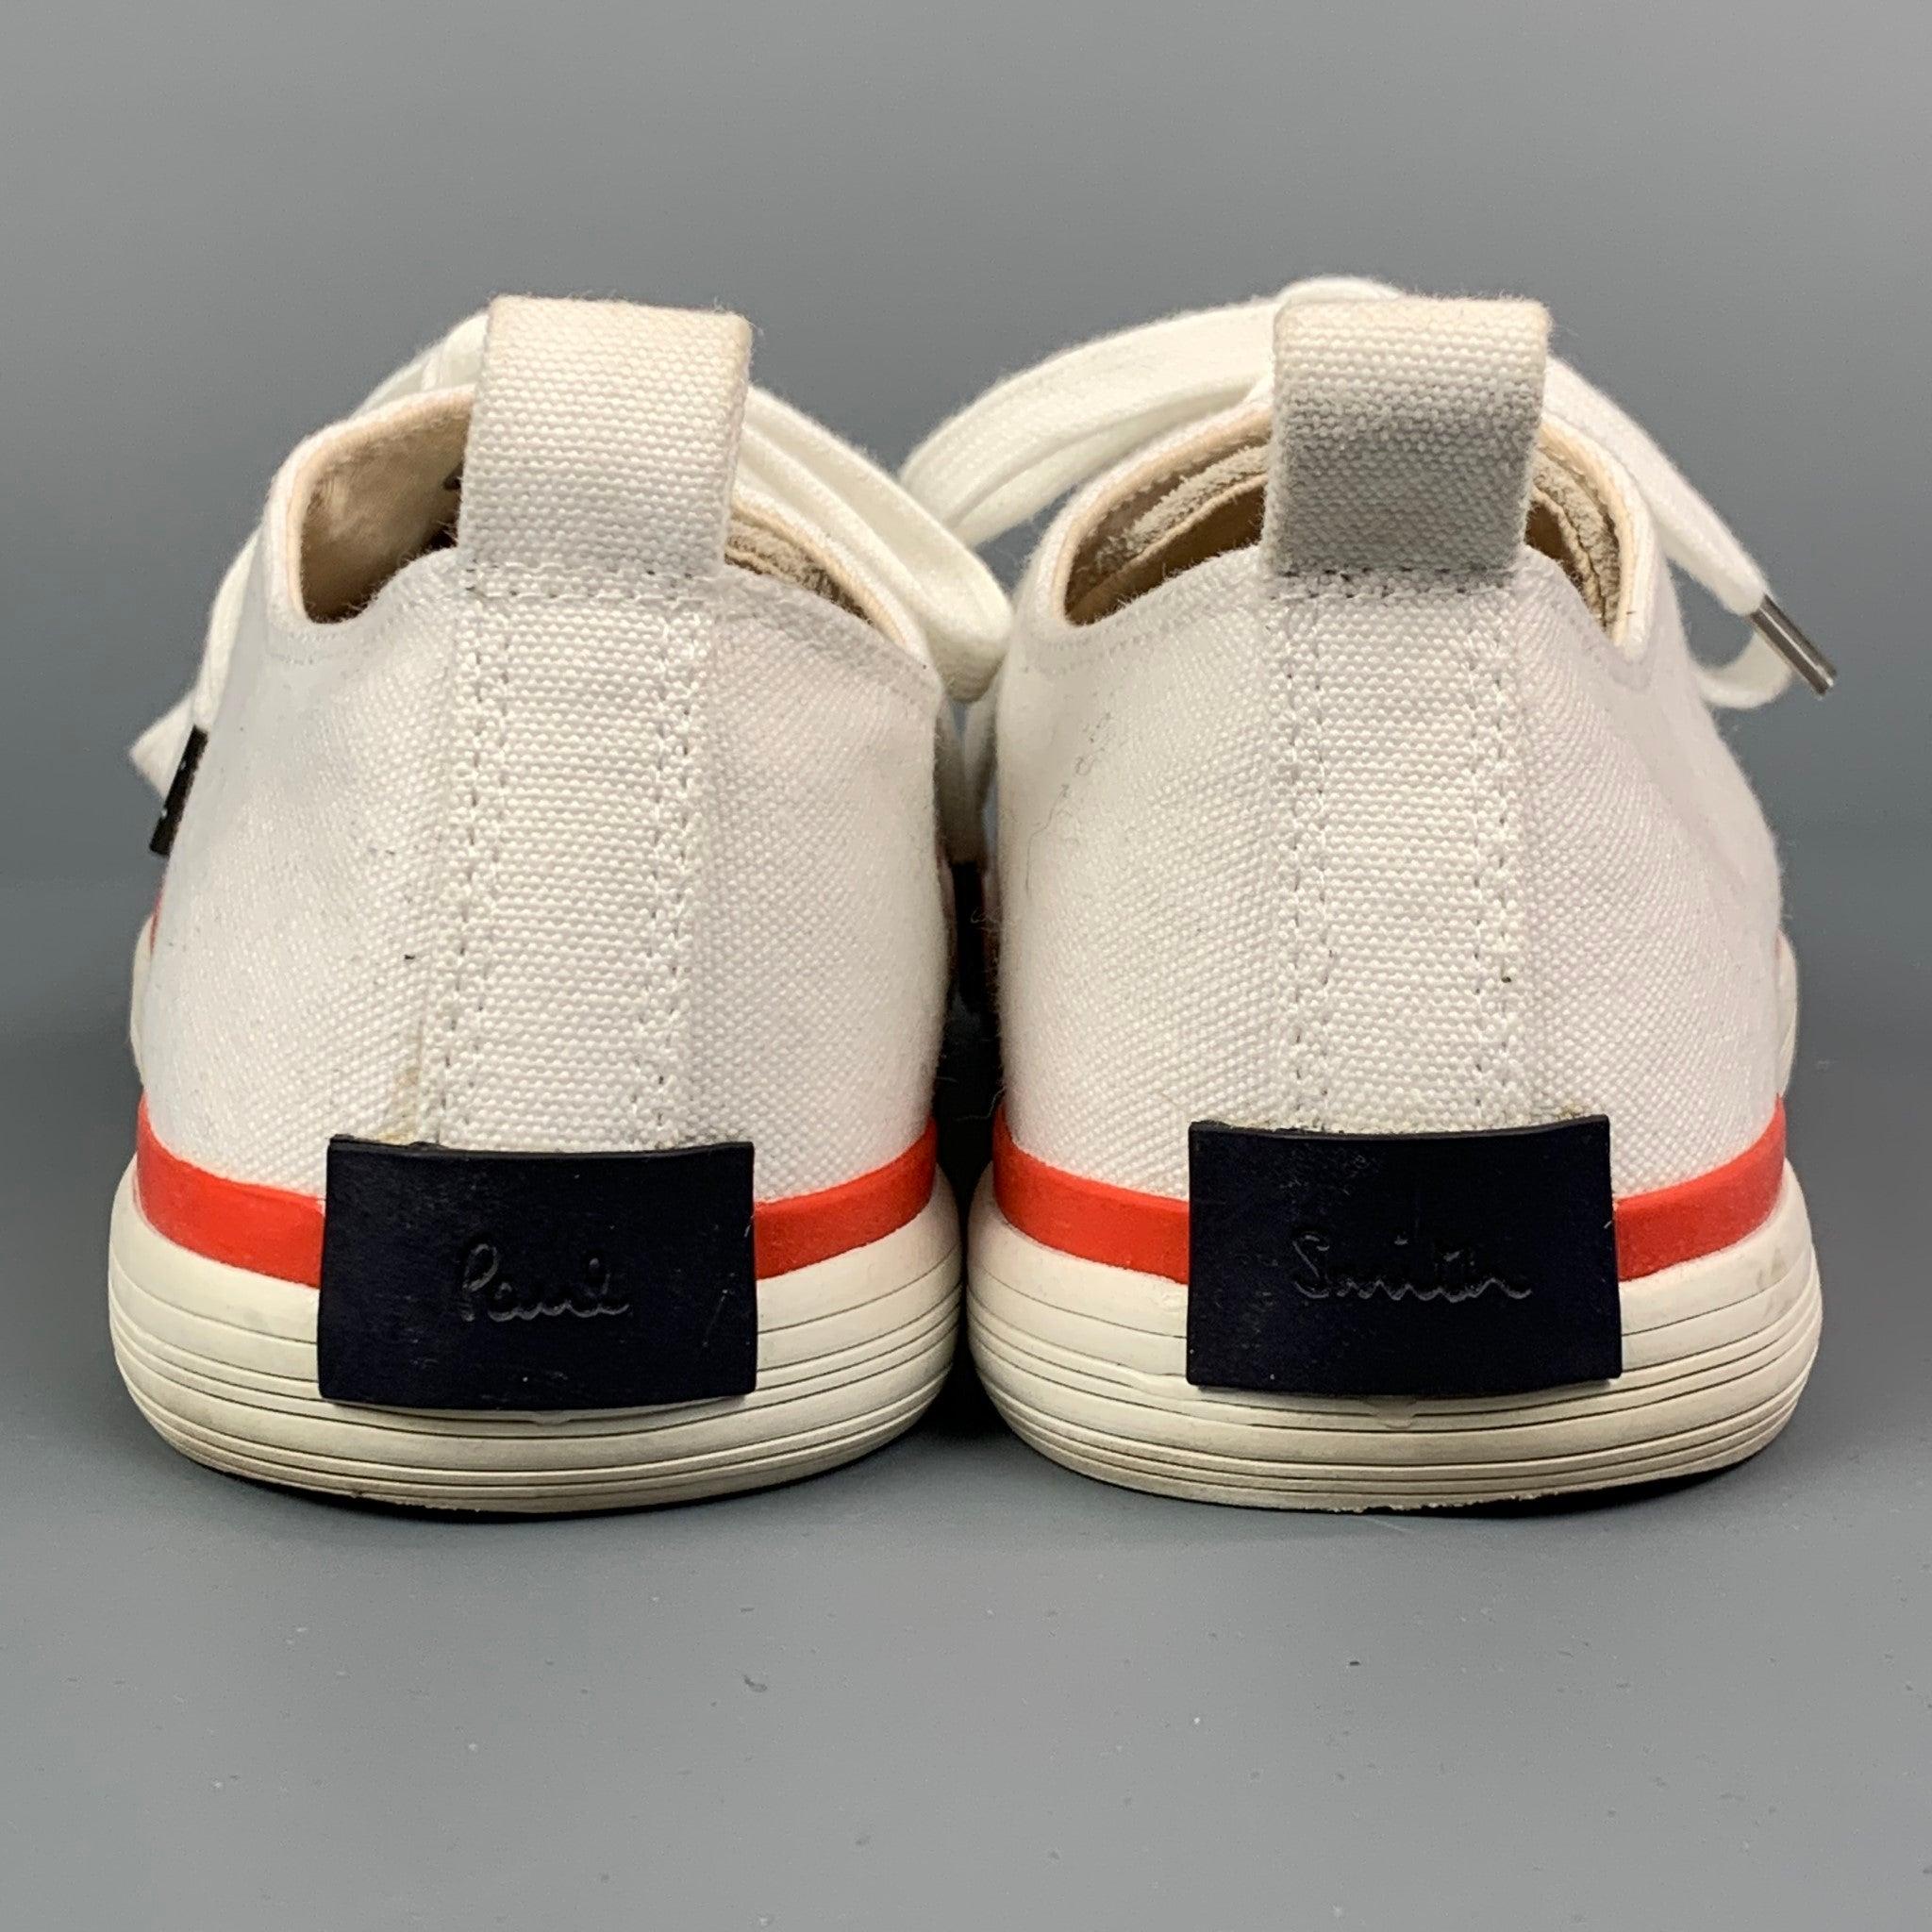 PAUL SMITH Size 7 White Canvas Lace Up Bernard Trainer Sneakers 1